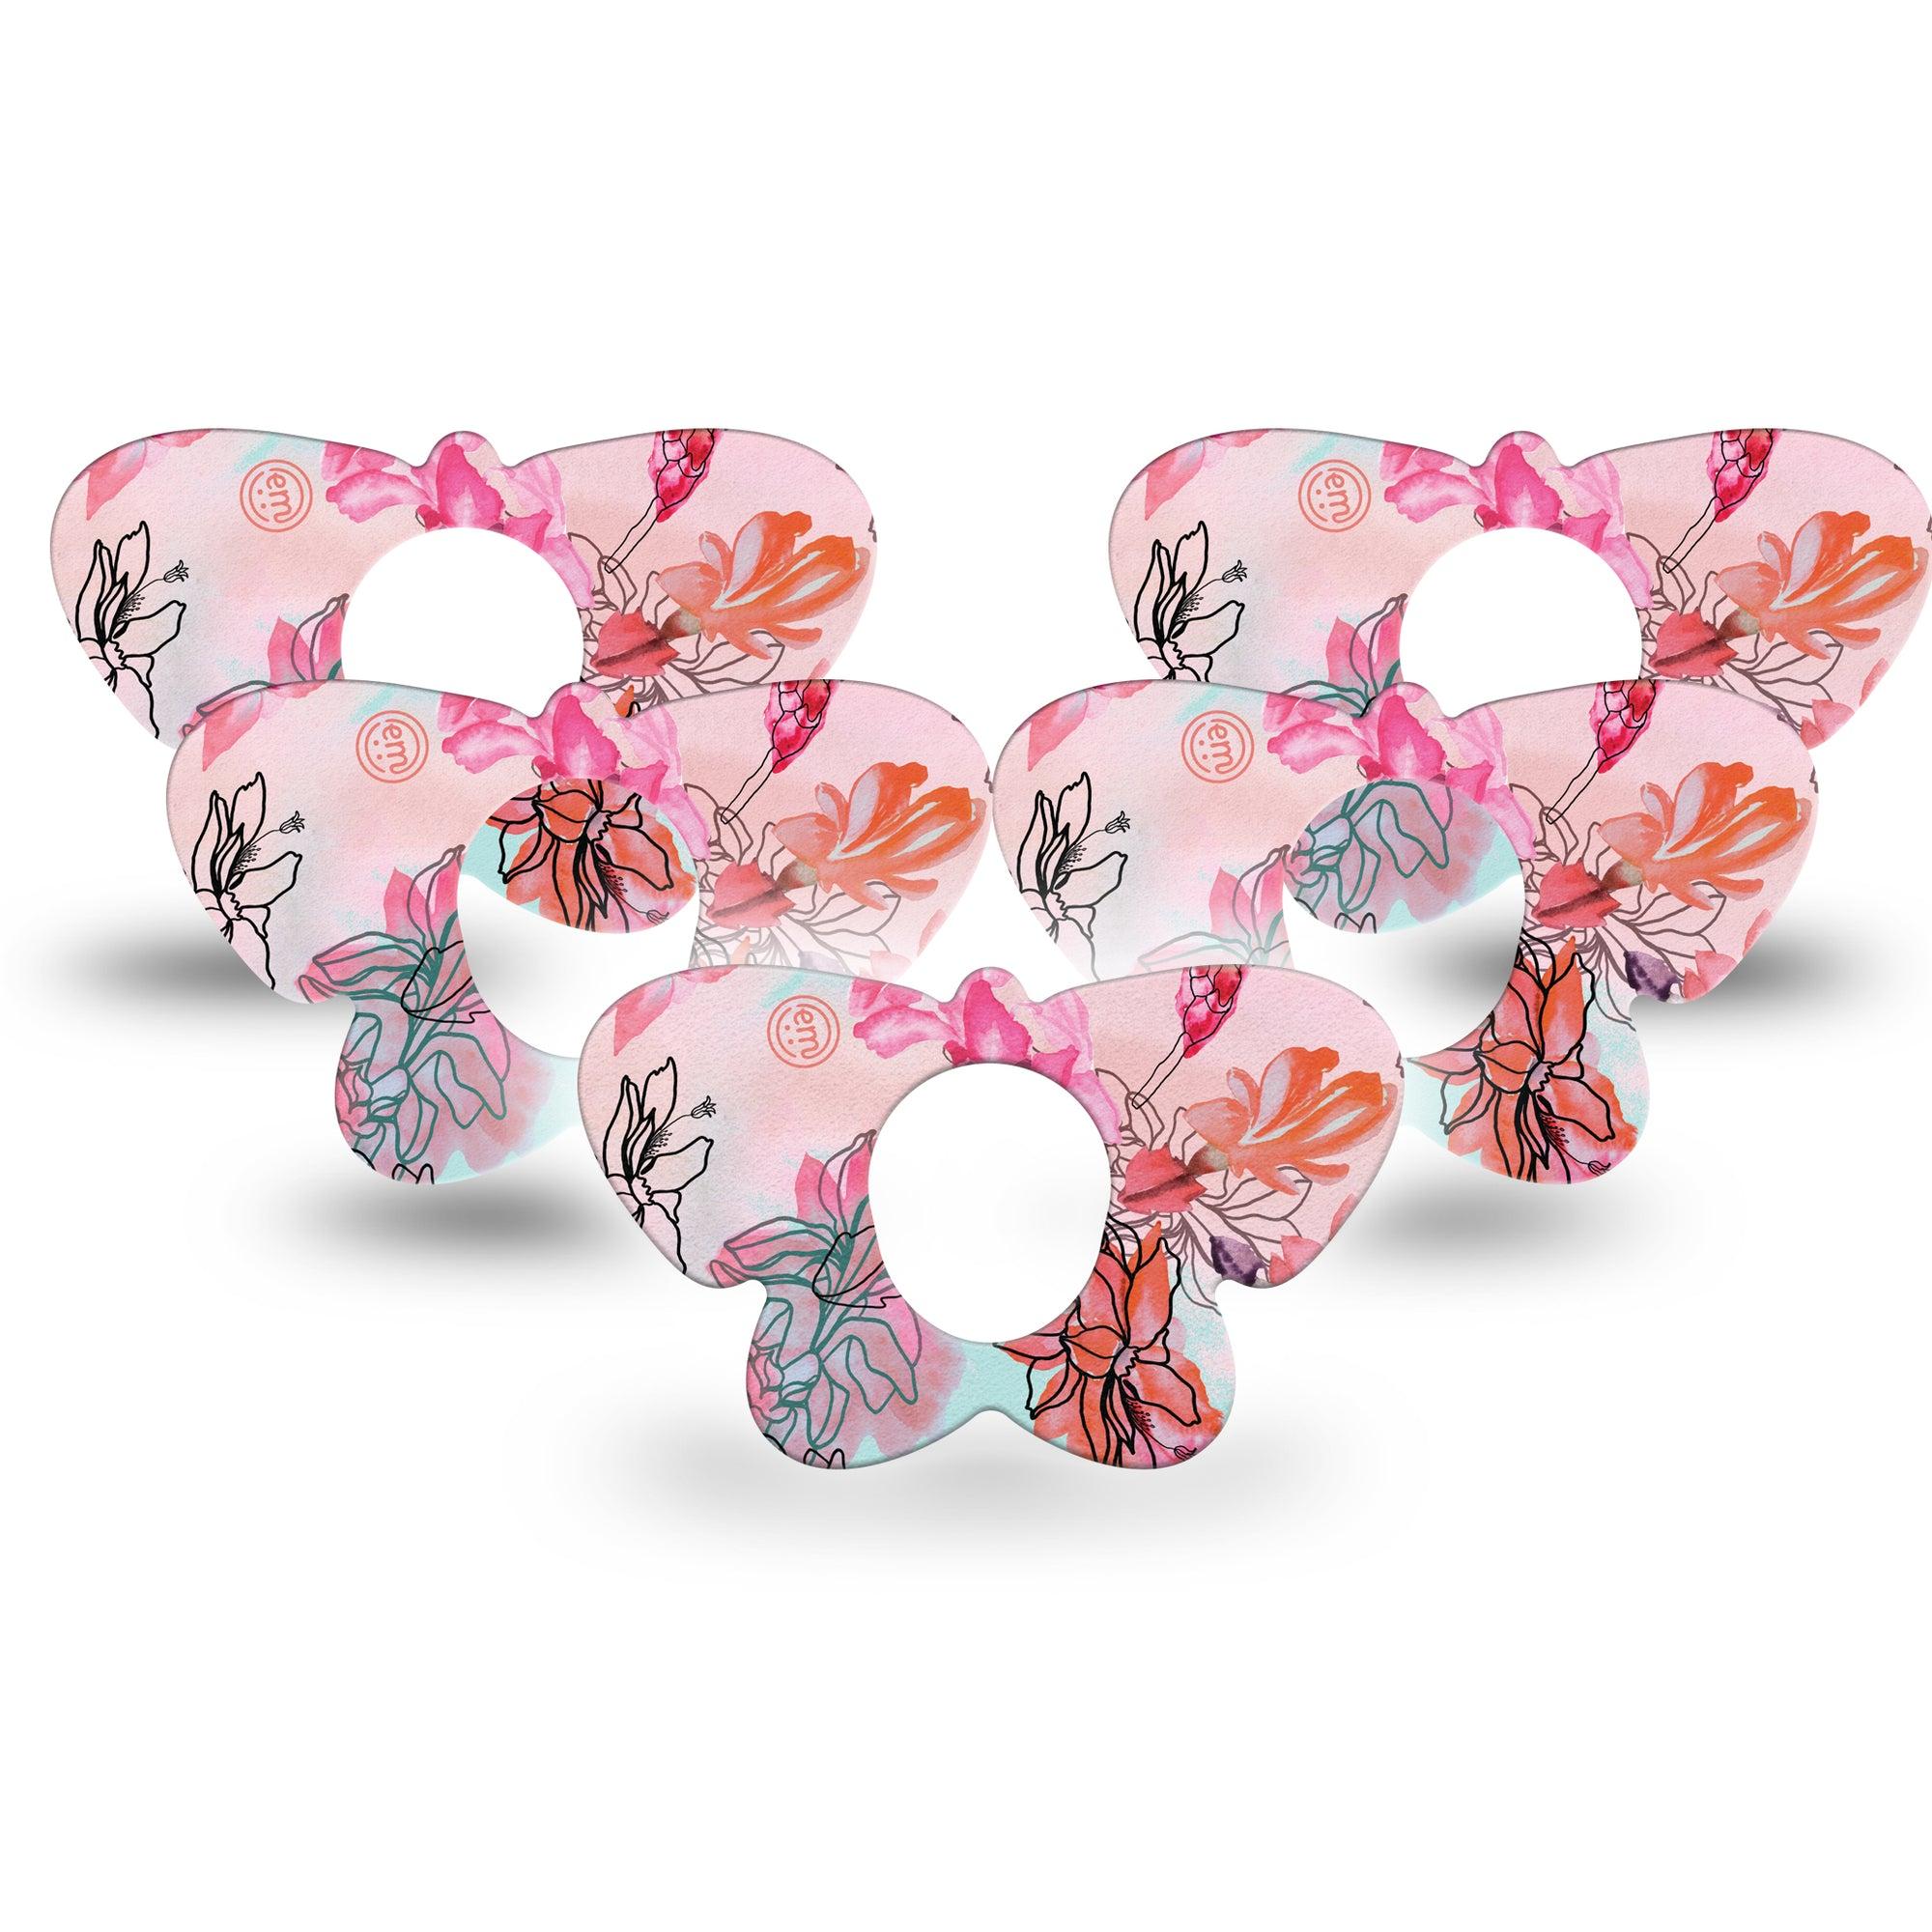 ExpressionMed Whismical Blossoms Butterfly Dexcom G7 Tape, 5-Pack, Outlandish Pink Floral Themed, CGM Overlay Patch Design